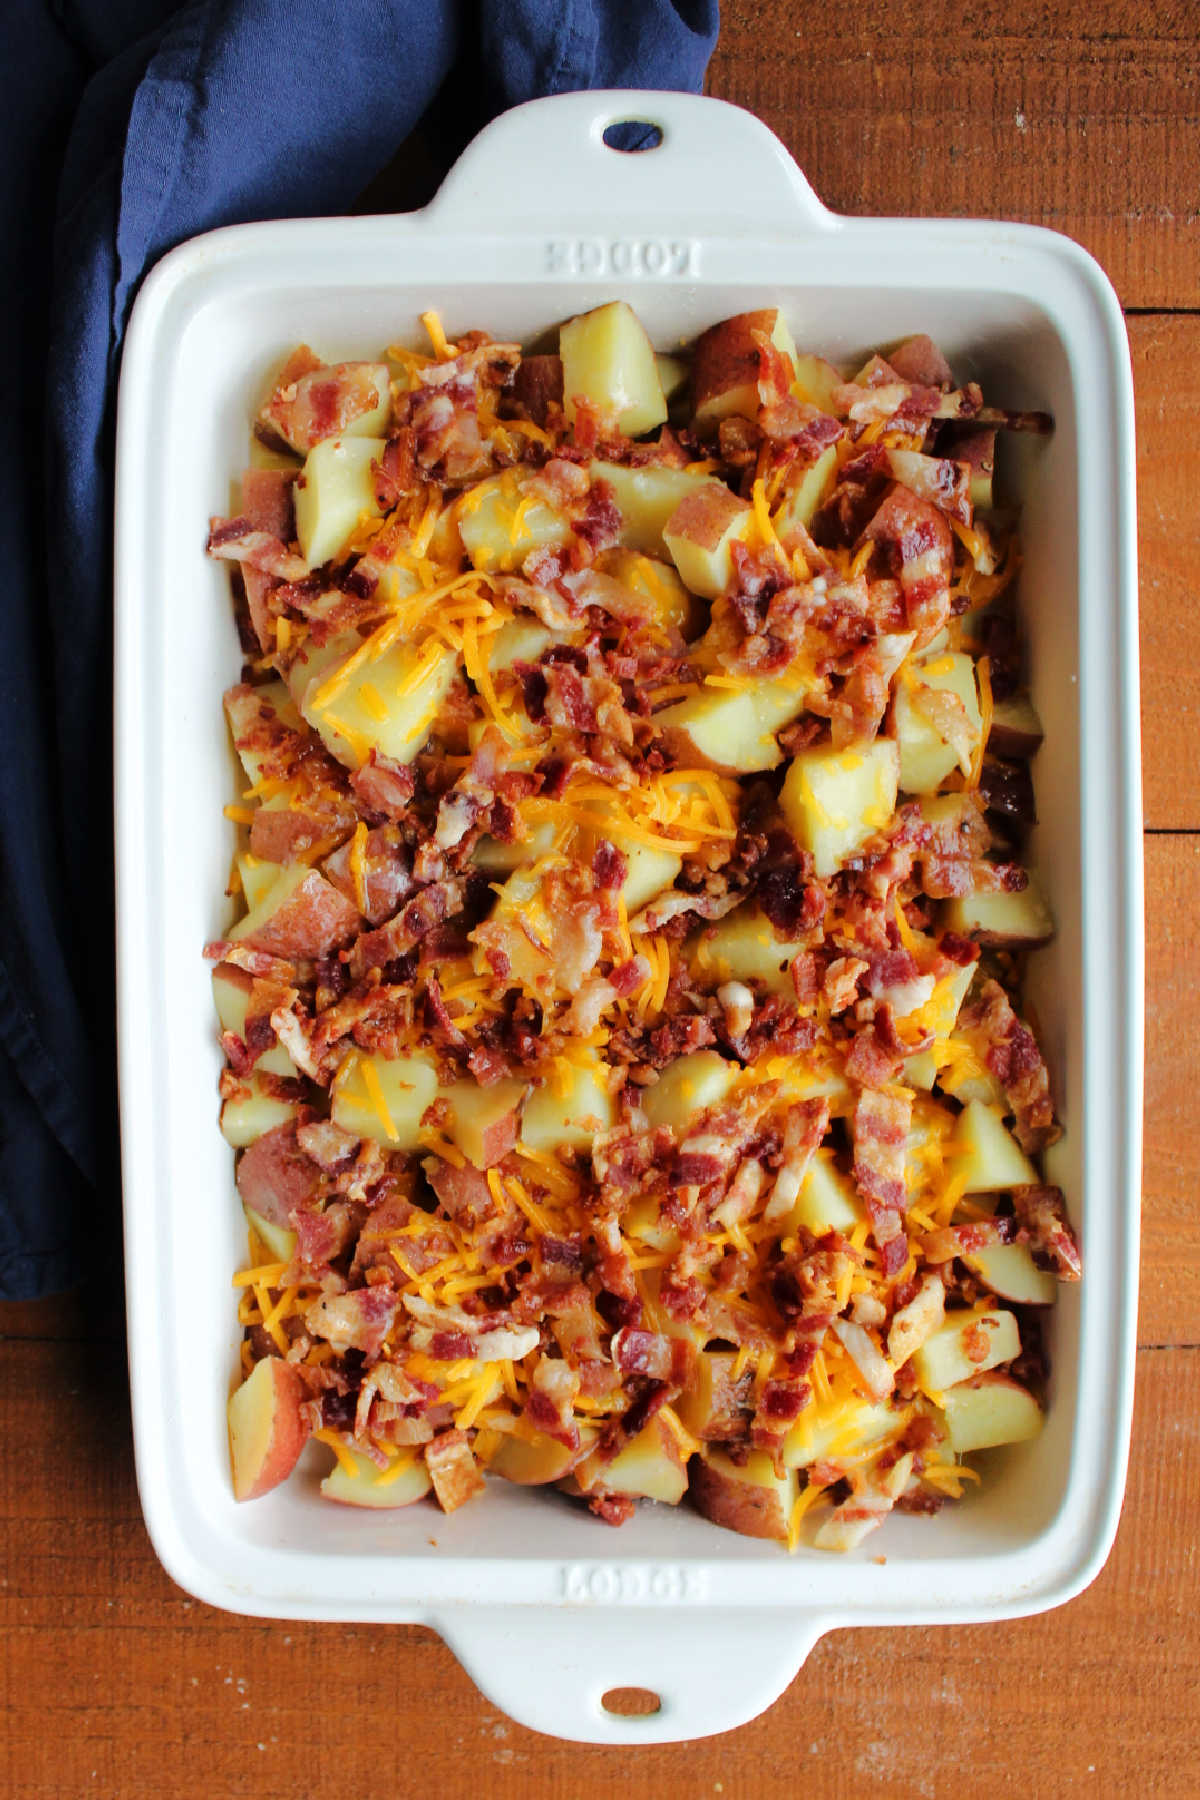 Casserole dish with cooked potatoes topped with shredded cheddar cheese and chopped cooked bacon ready to go in the oven.